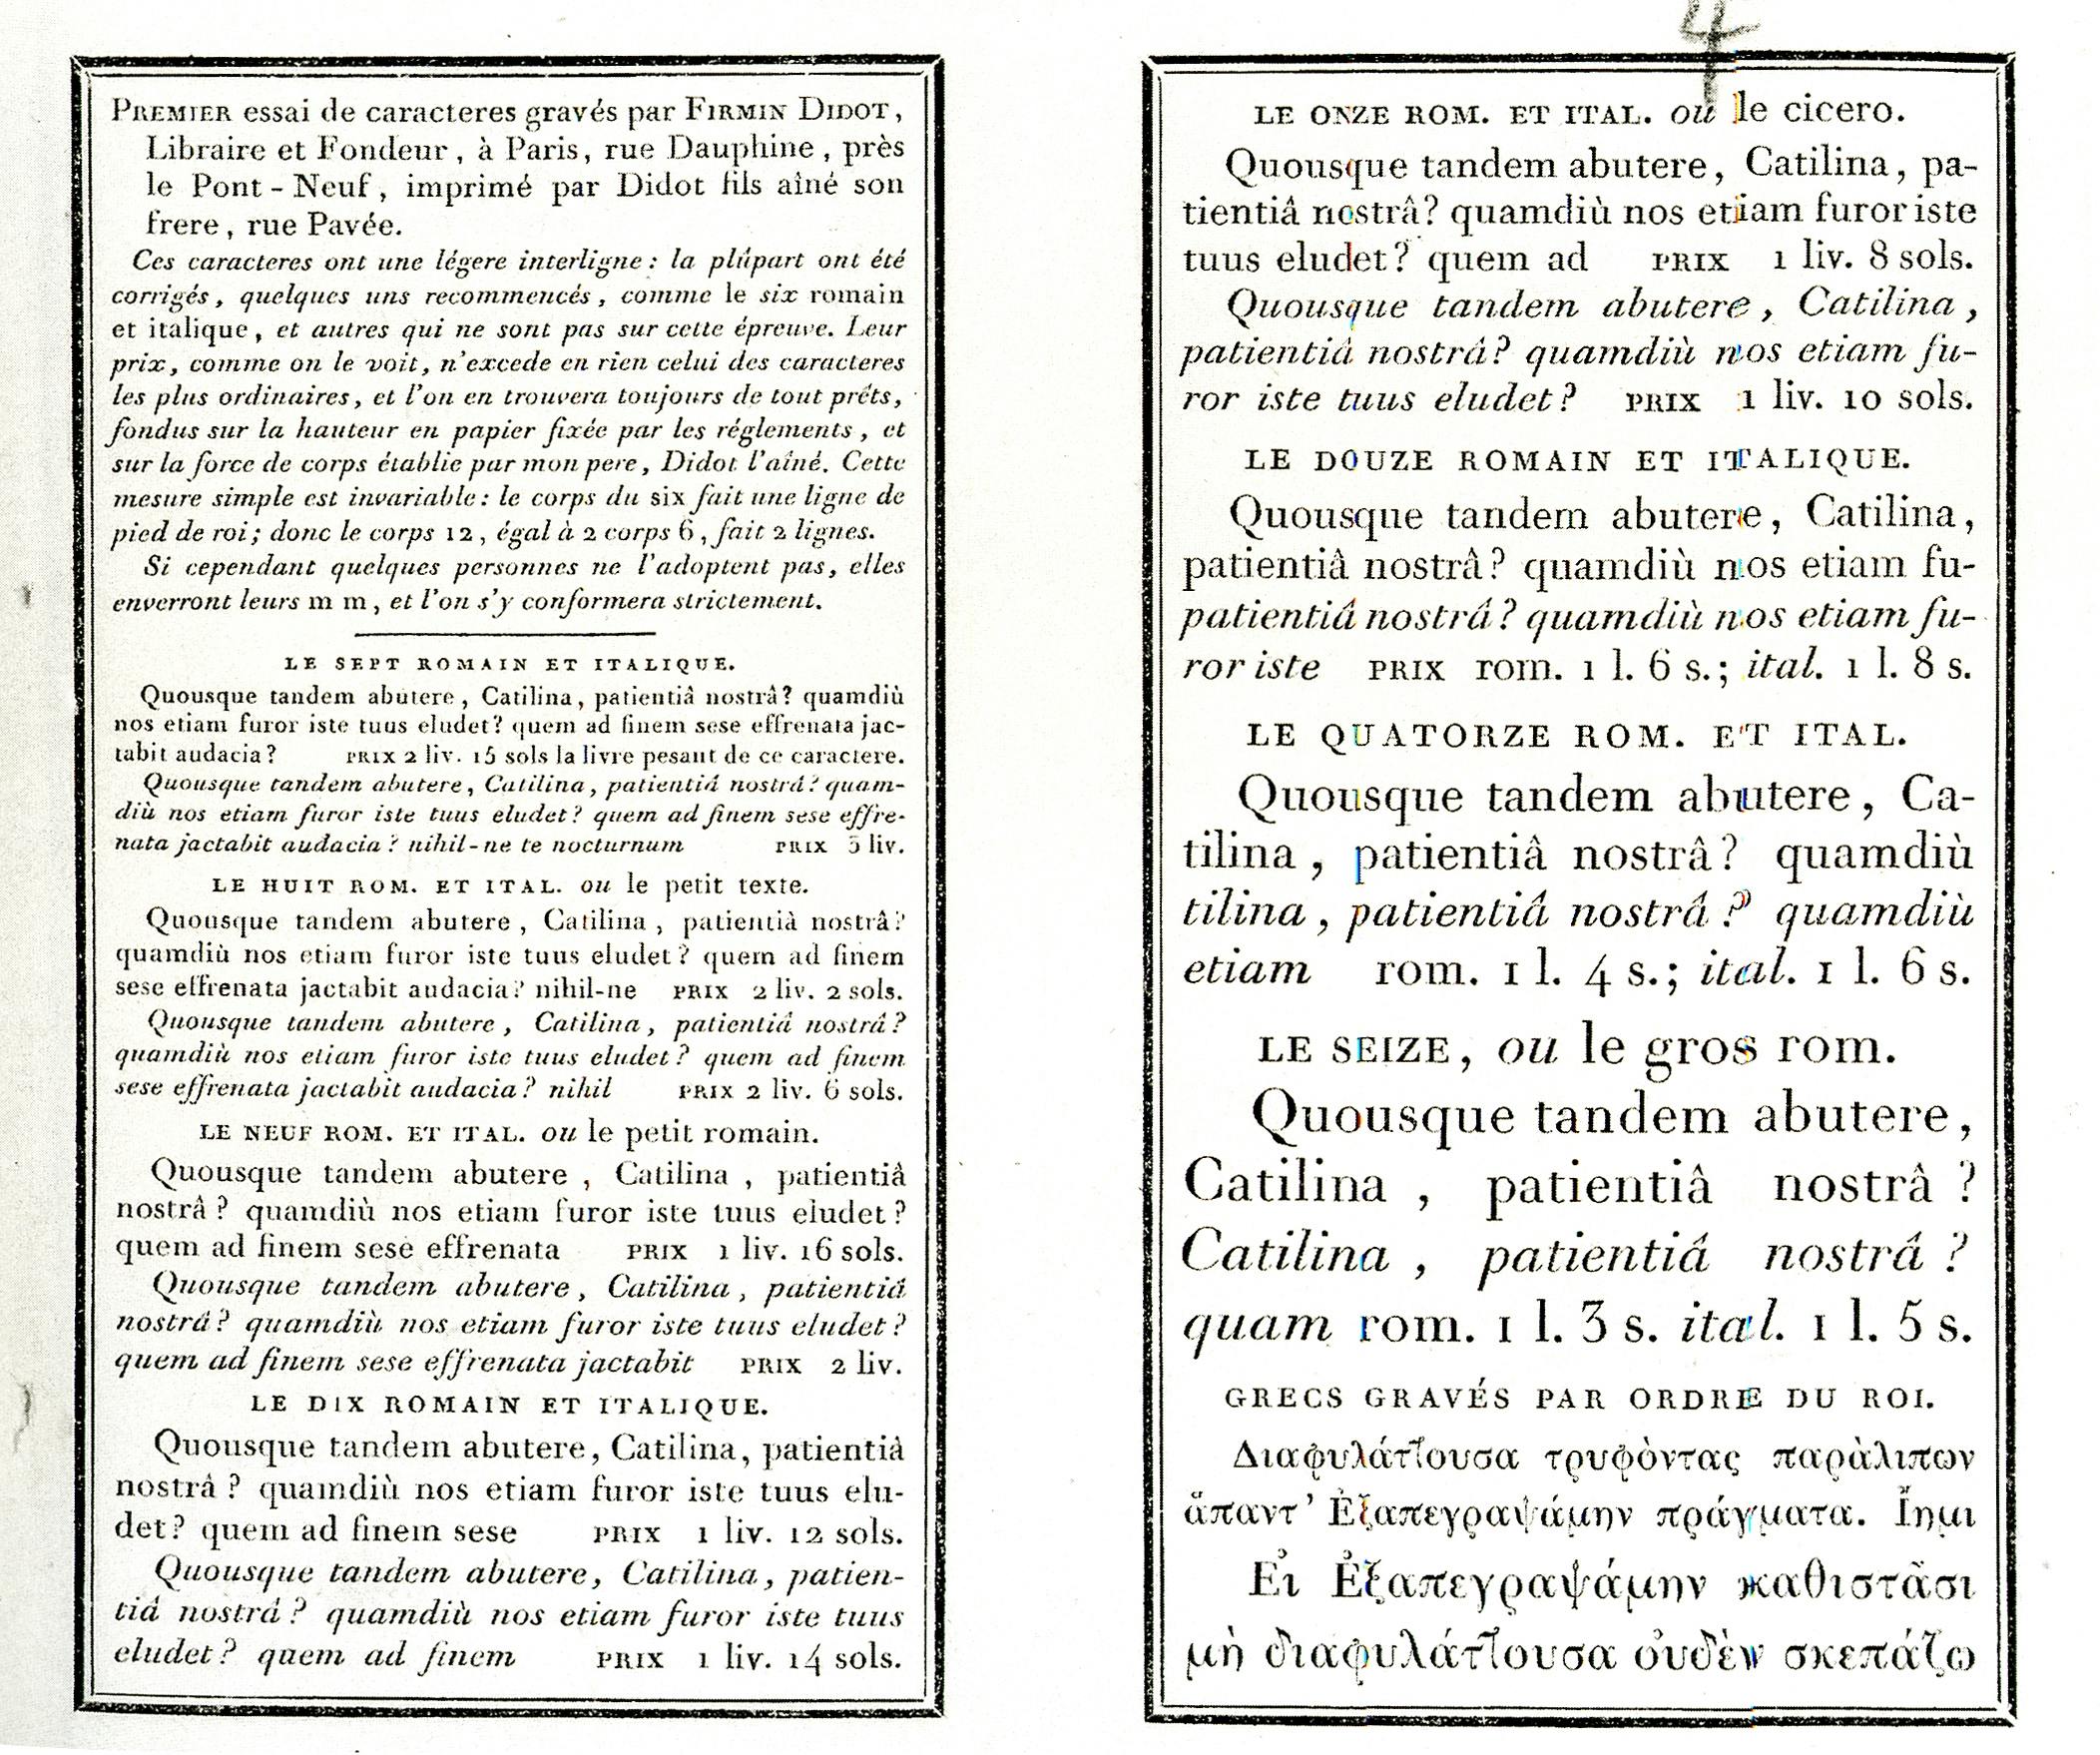 Firmin Didot: author, book printer, typefounder and punchcutter.